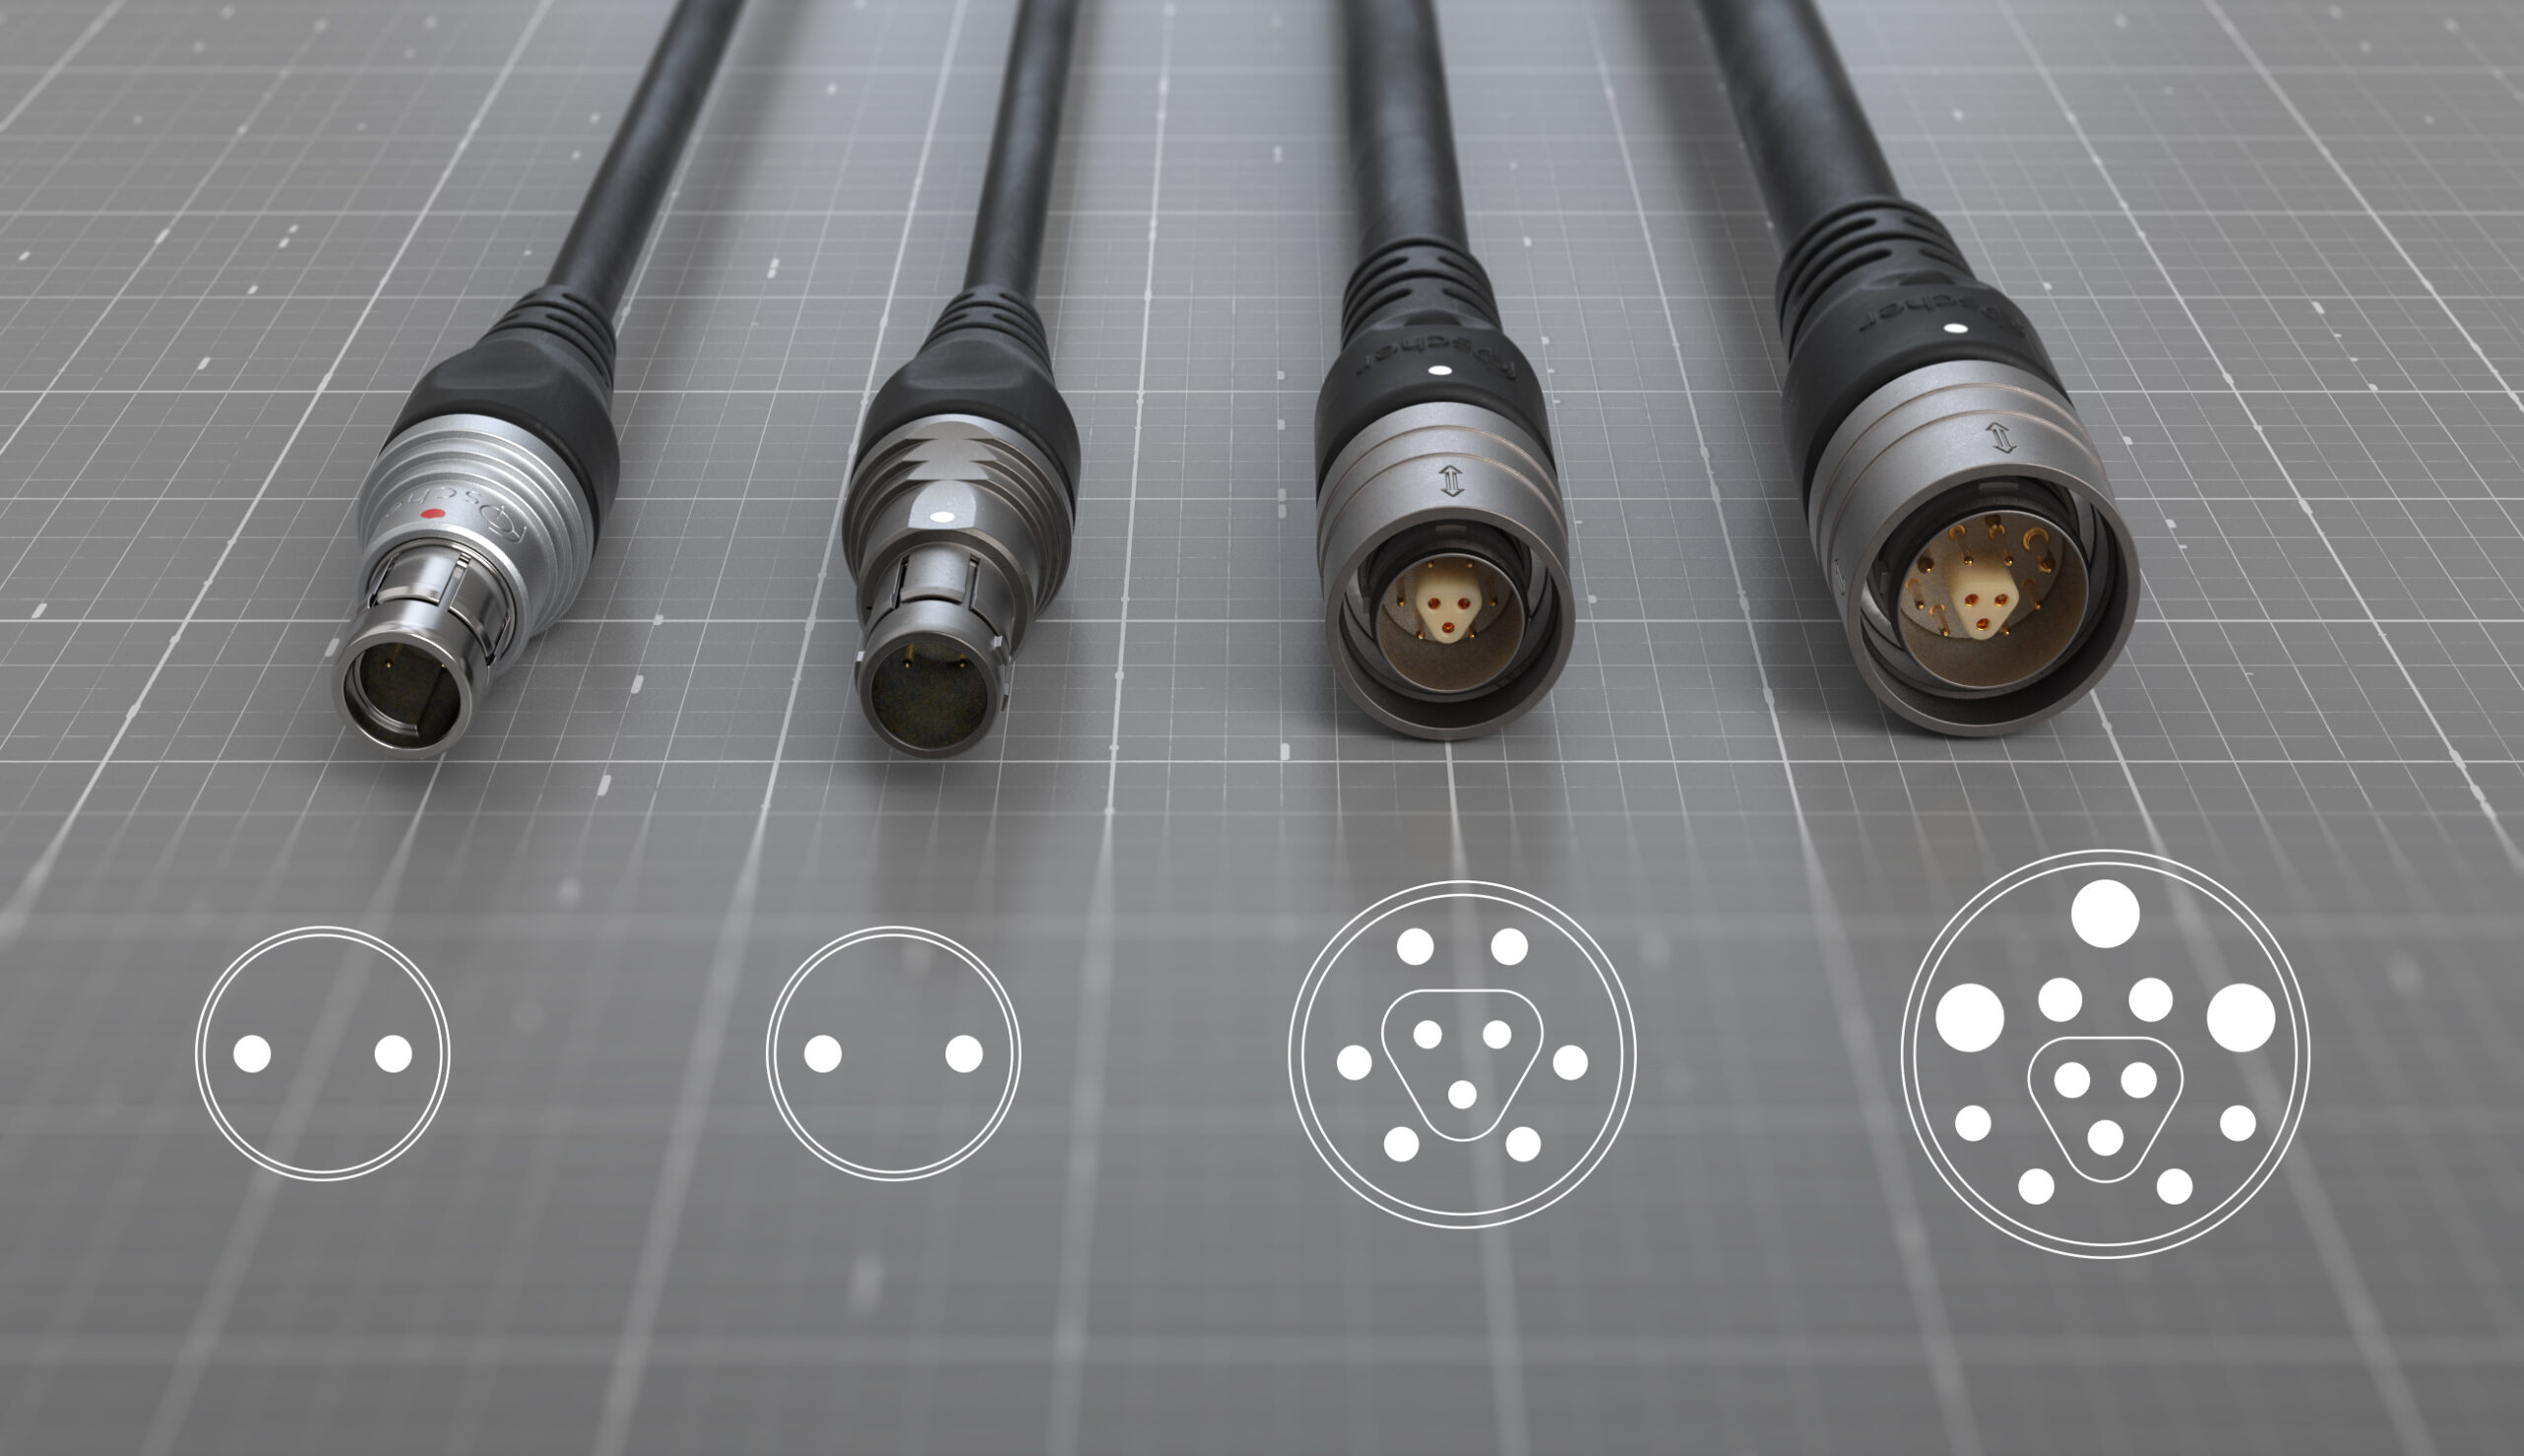 Fischer Connectors enhances IIoT connectivity with ultra-rugged solutions using Single Pair Ethernet and USB 3.2 protocols